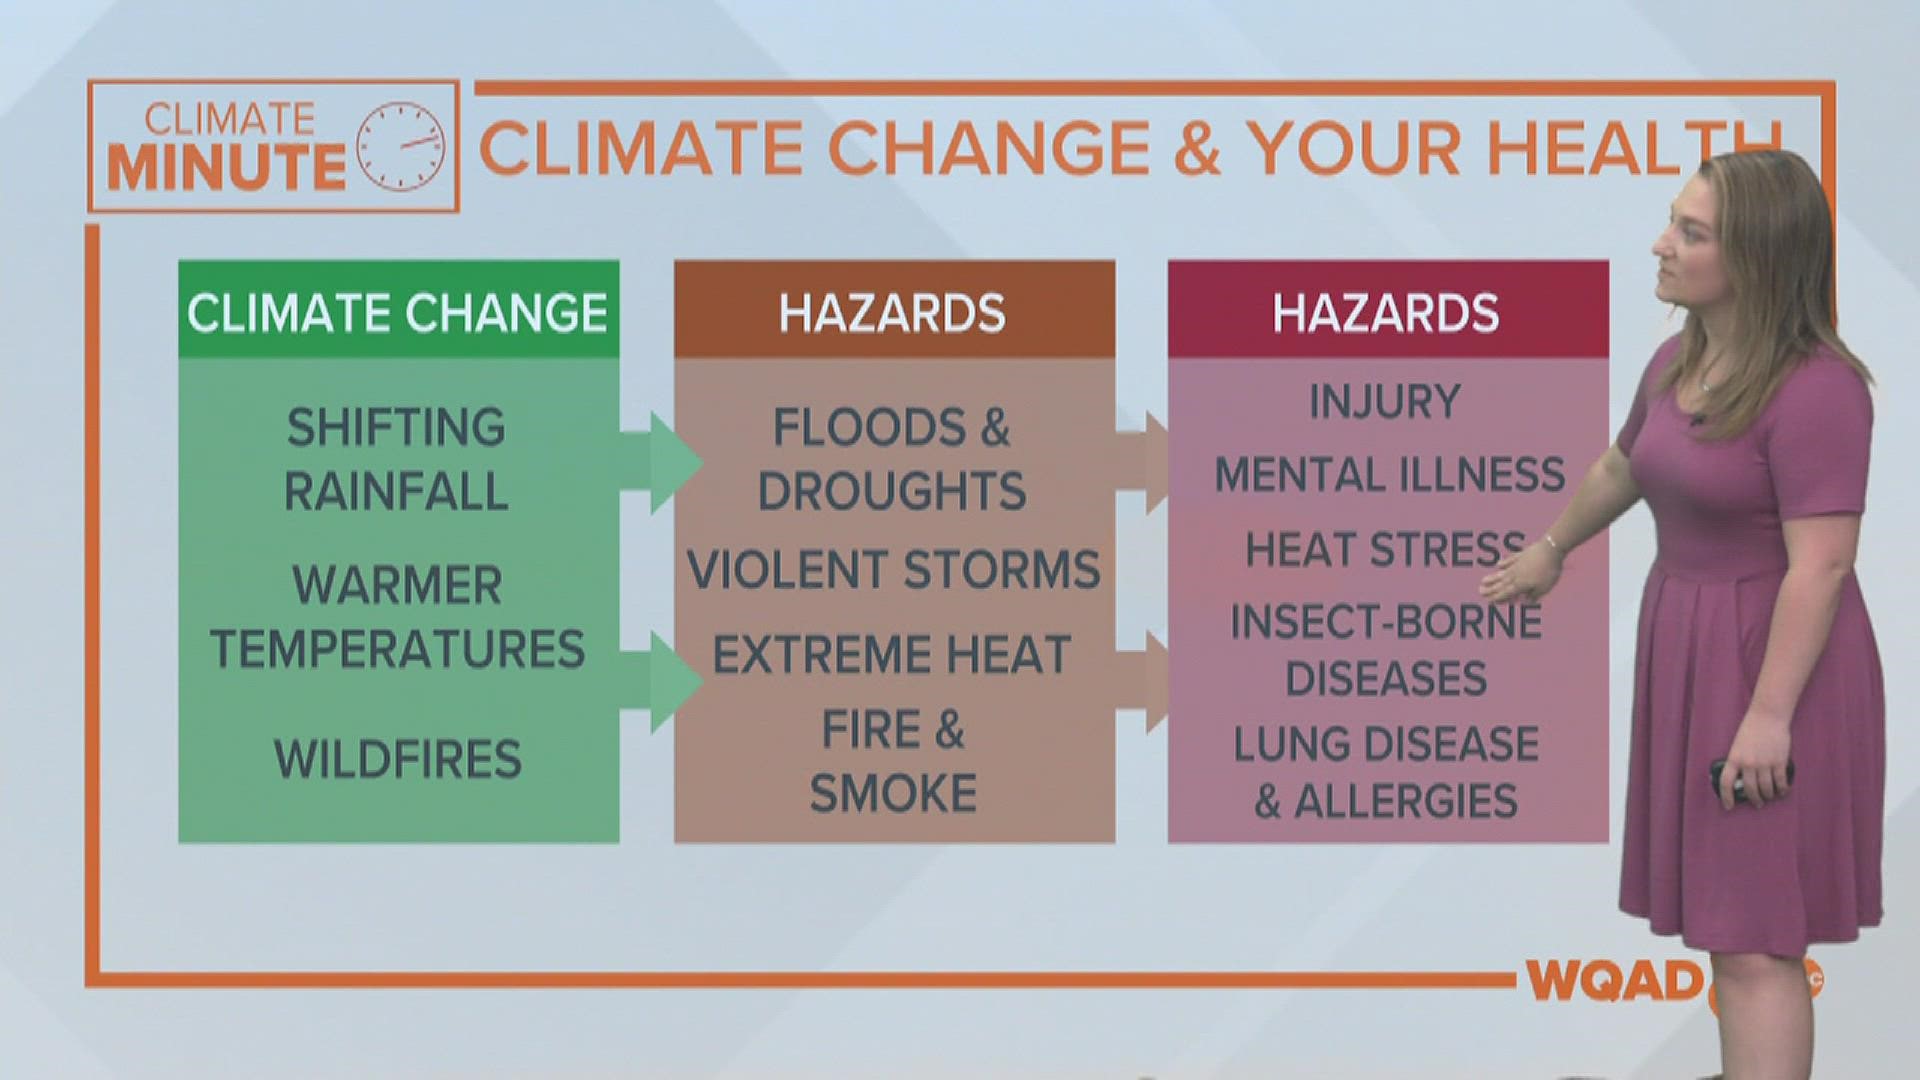 Climate change allows for more extreme weather events to happen. These prolonged events can impact your health over time.